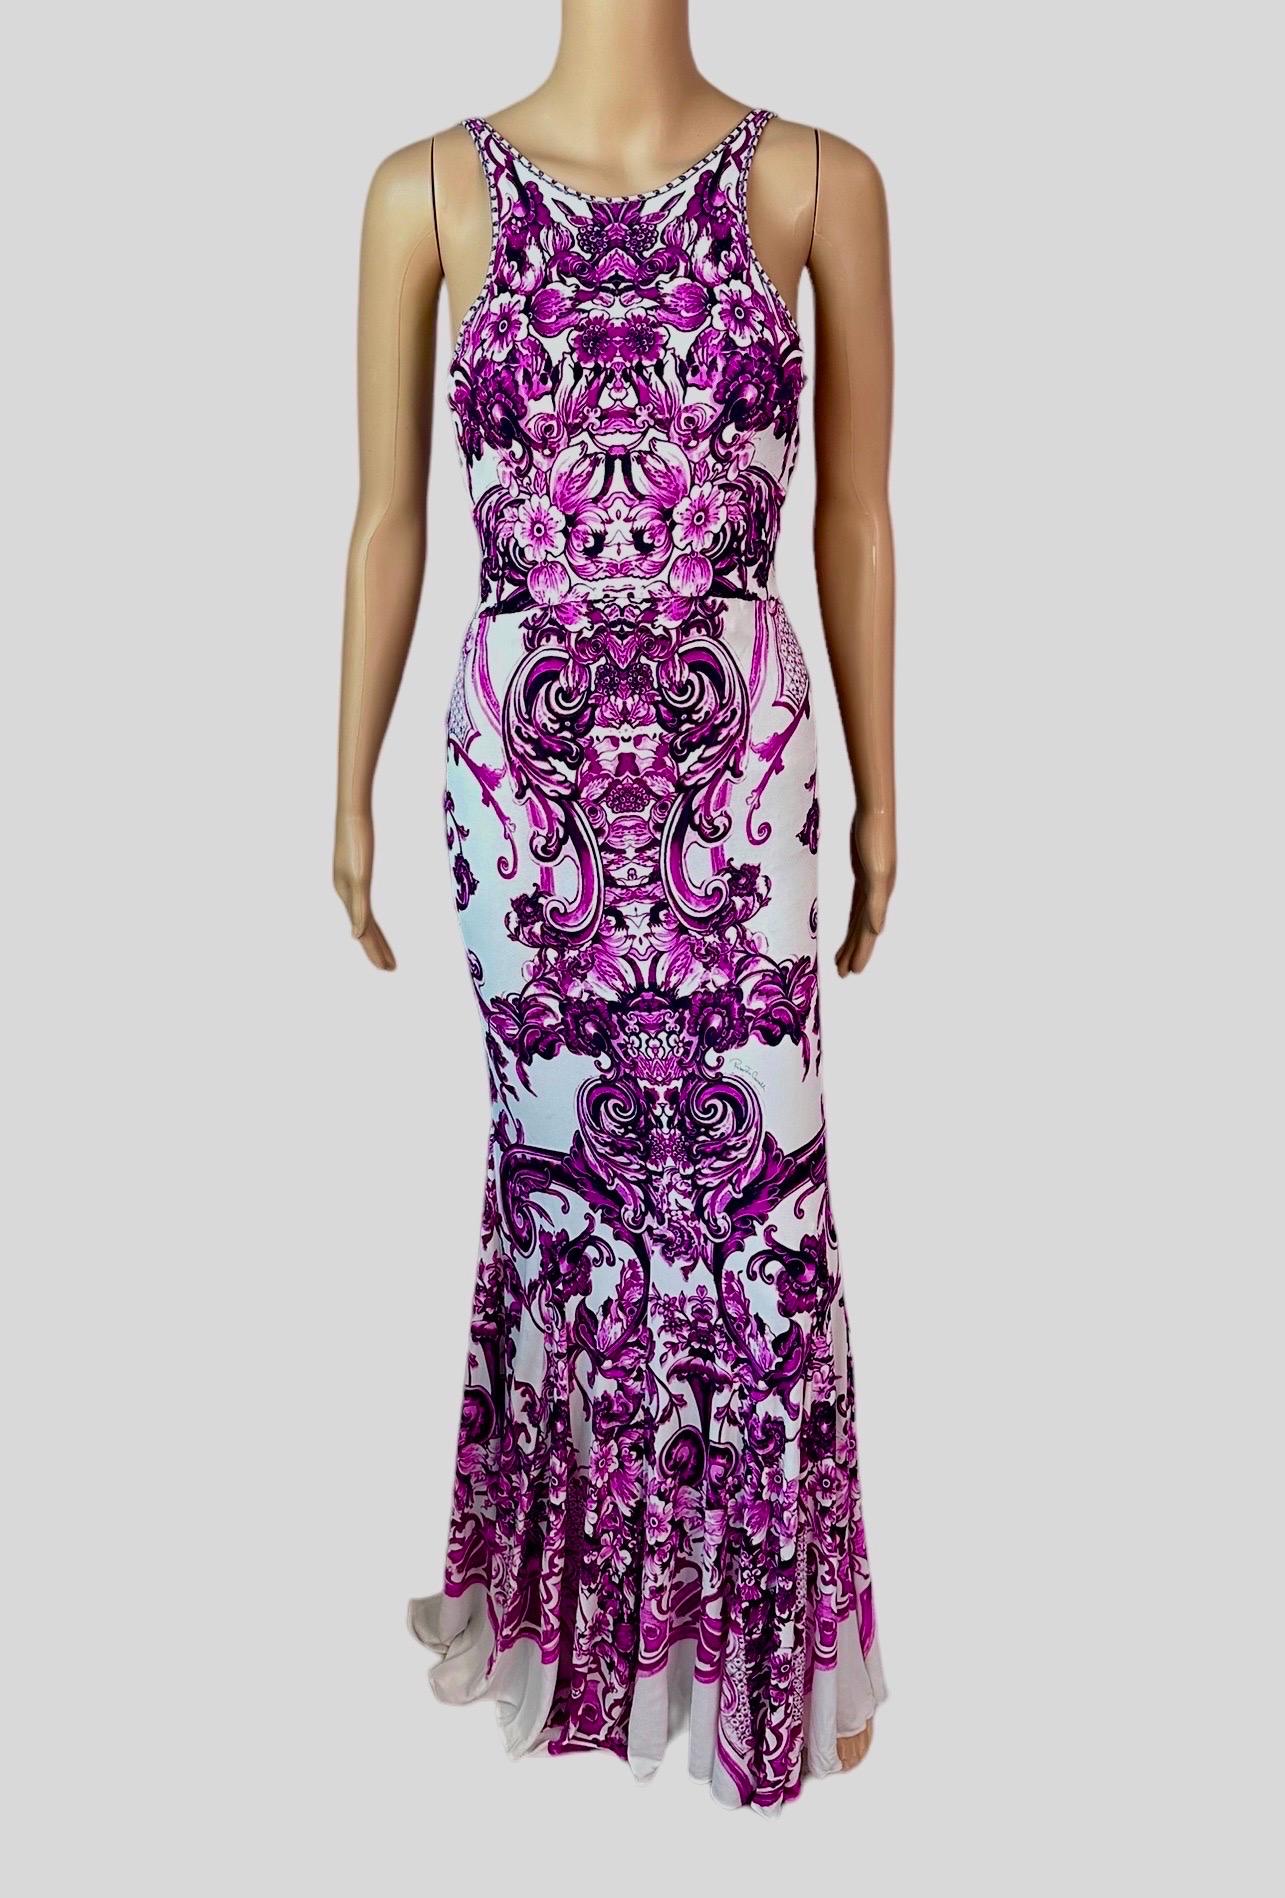 Roberto Cavalli Resort 2013 Chinoiserie Ming Porcelain Sheer Lace Evening Dress For Sale 2